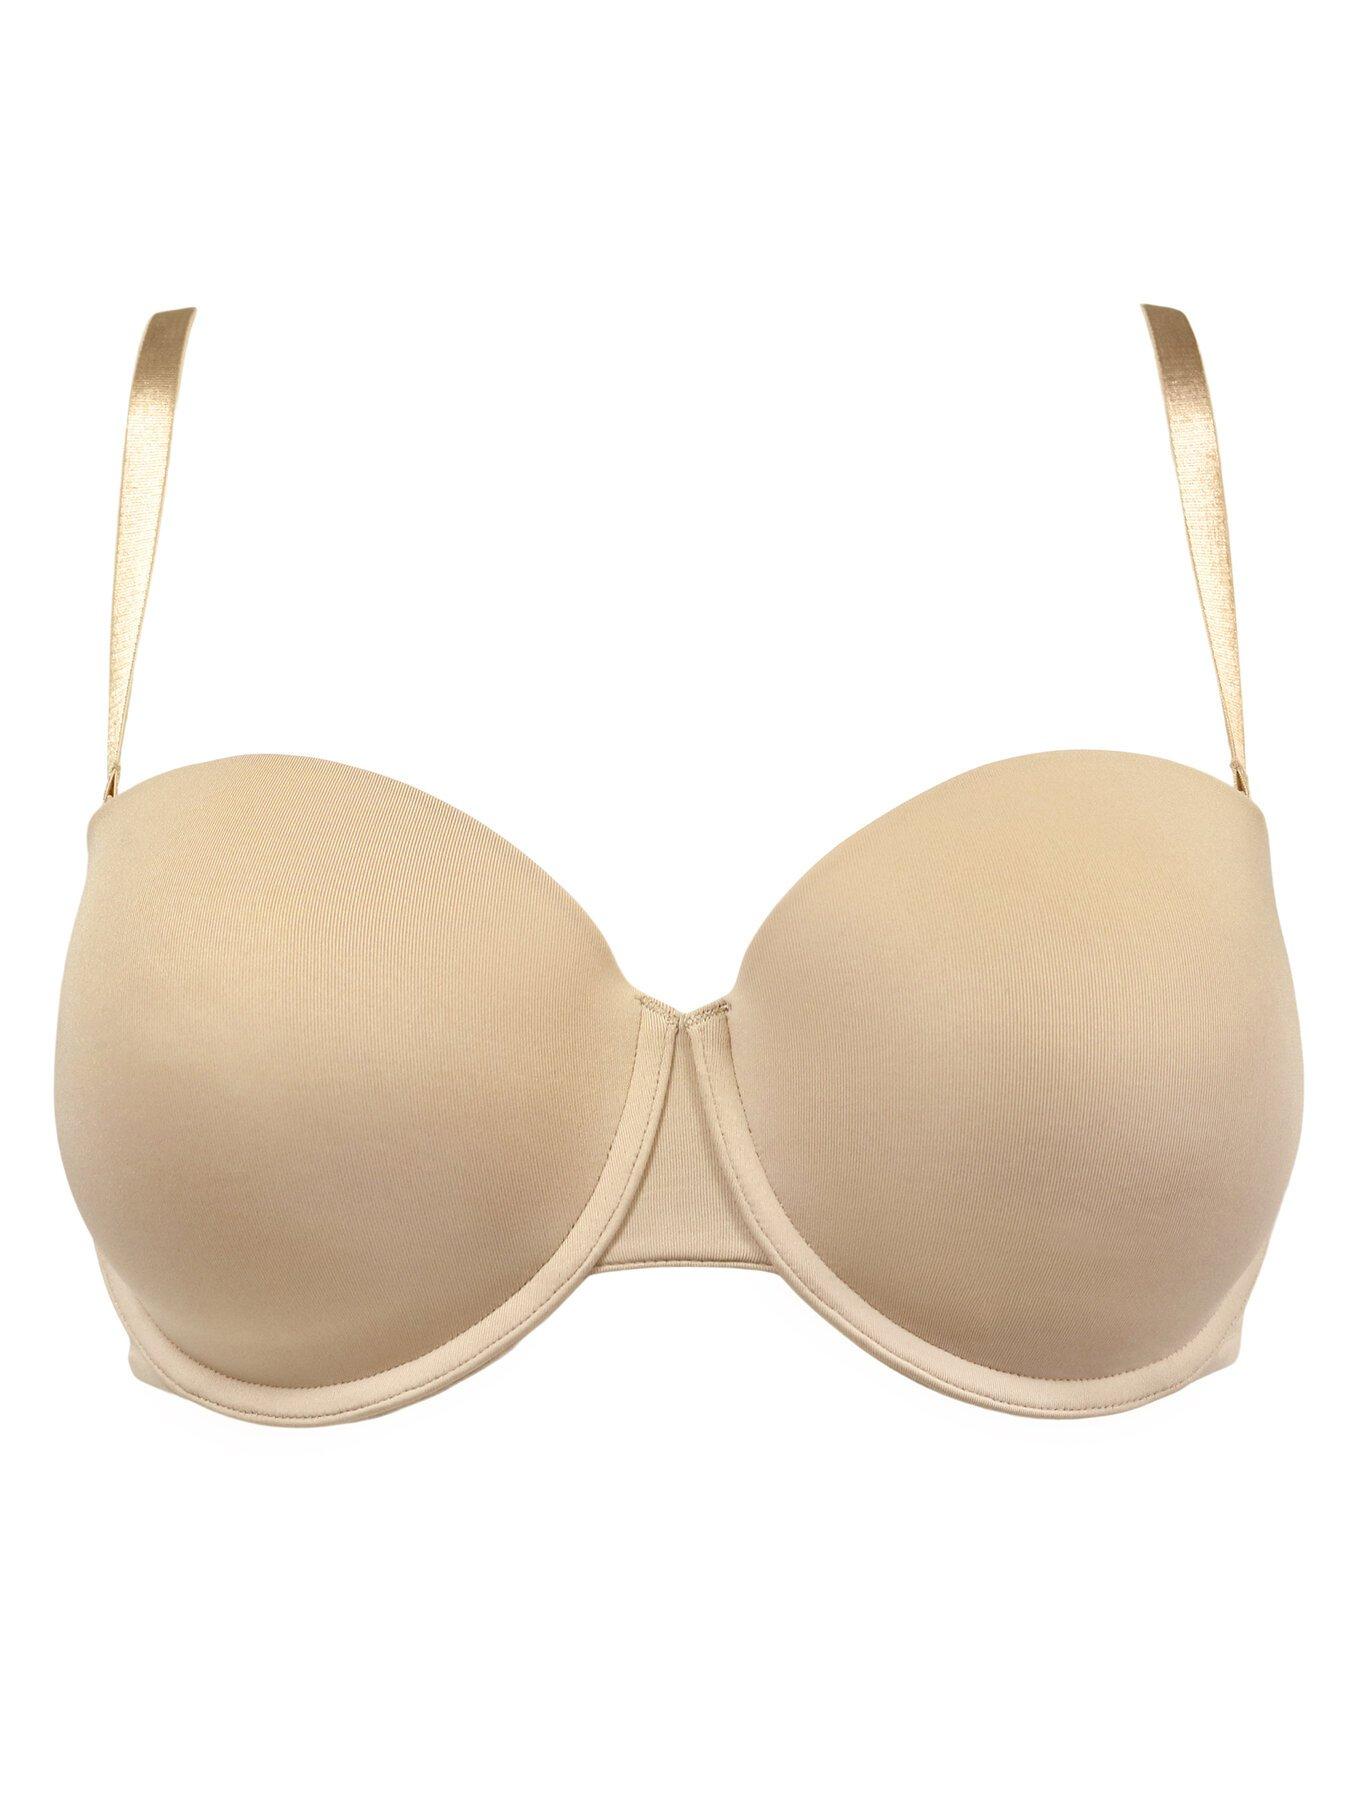 Sew in Bra Cups - AA to E Cup - Ivory, Beige or Black (Black, A Cup) :  Clothing, Shoes & Jewelry 